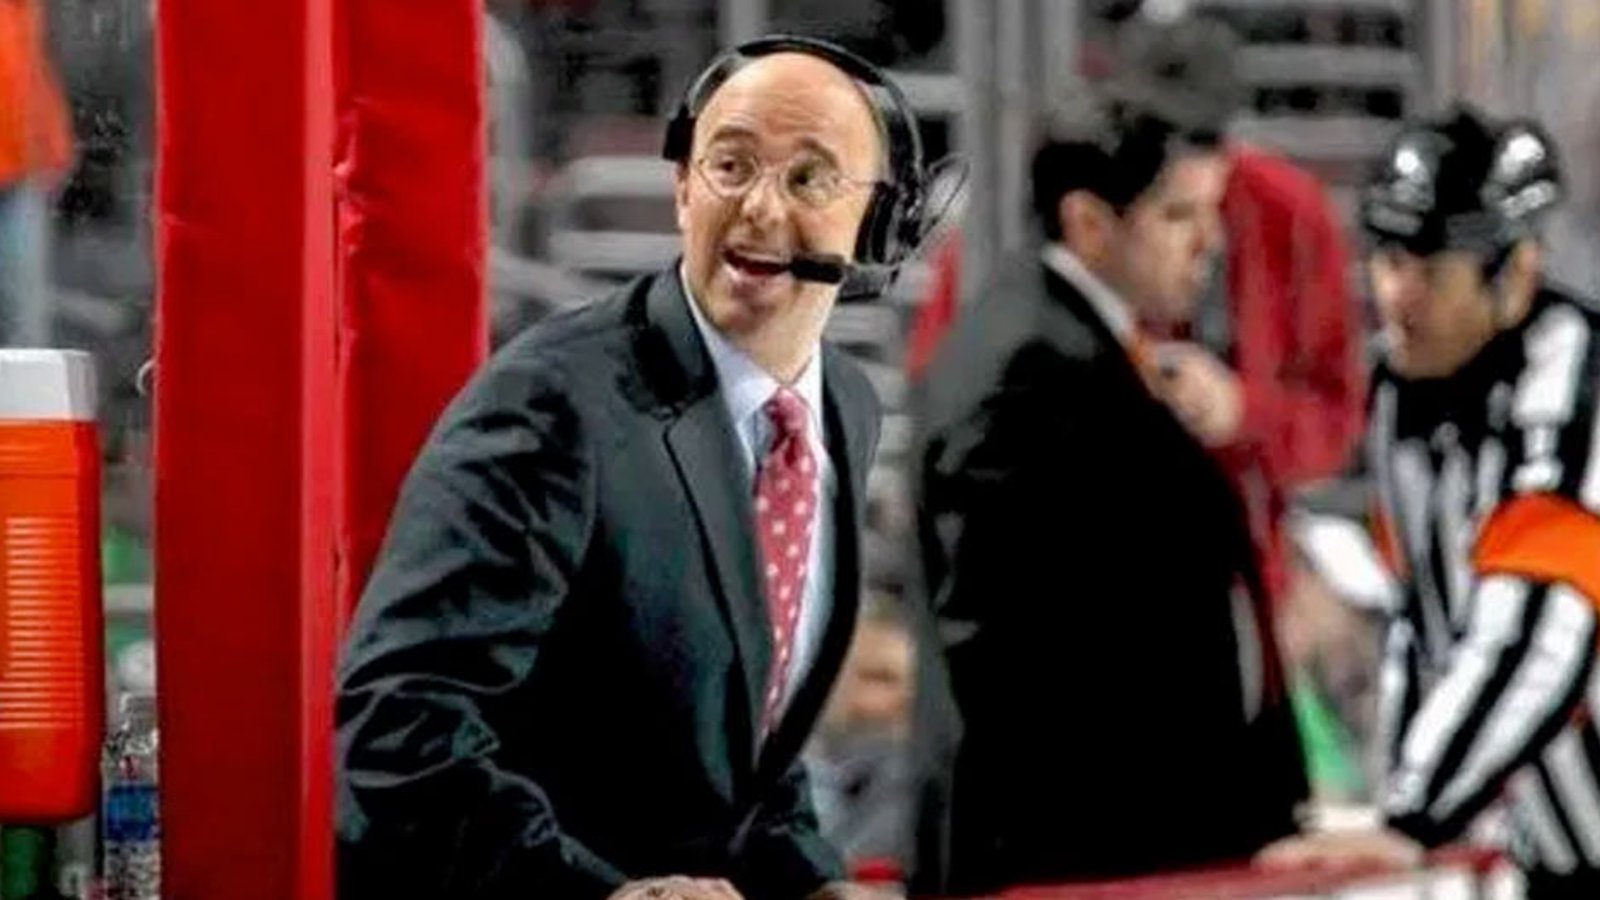 Pierre McGuire refutes reports of his firing at NBC